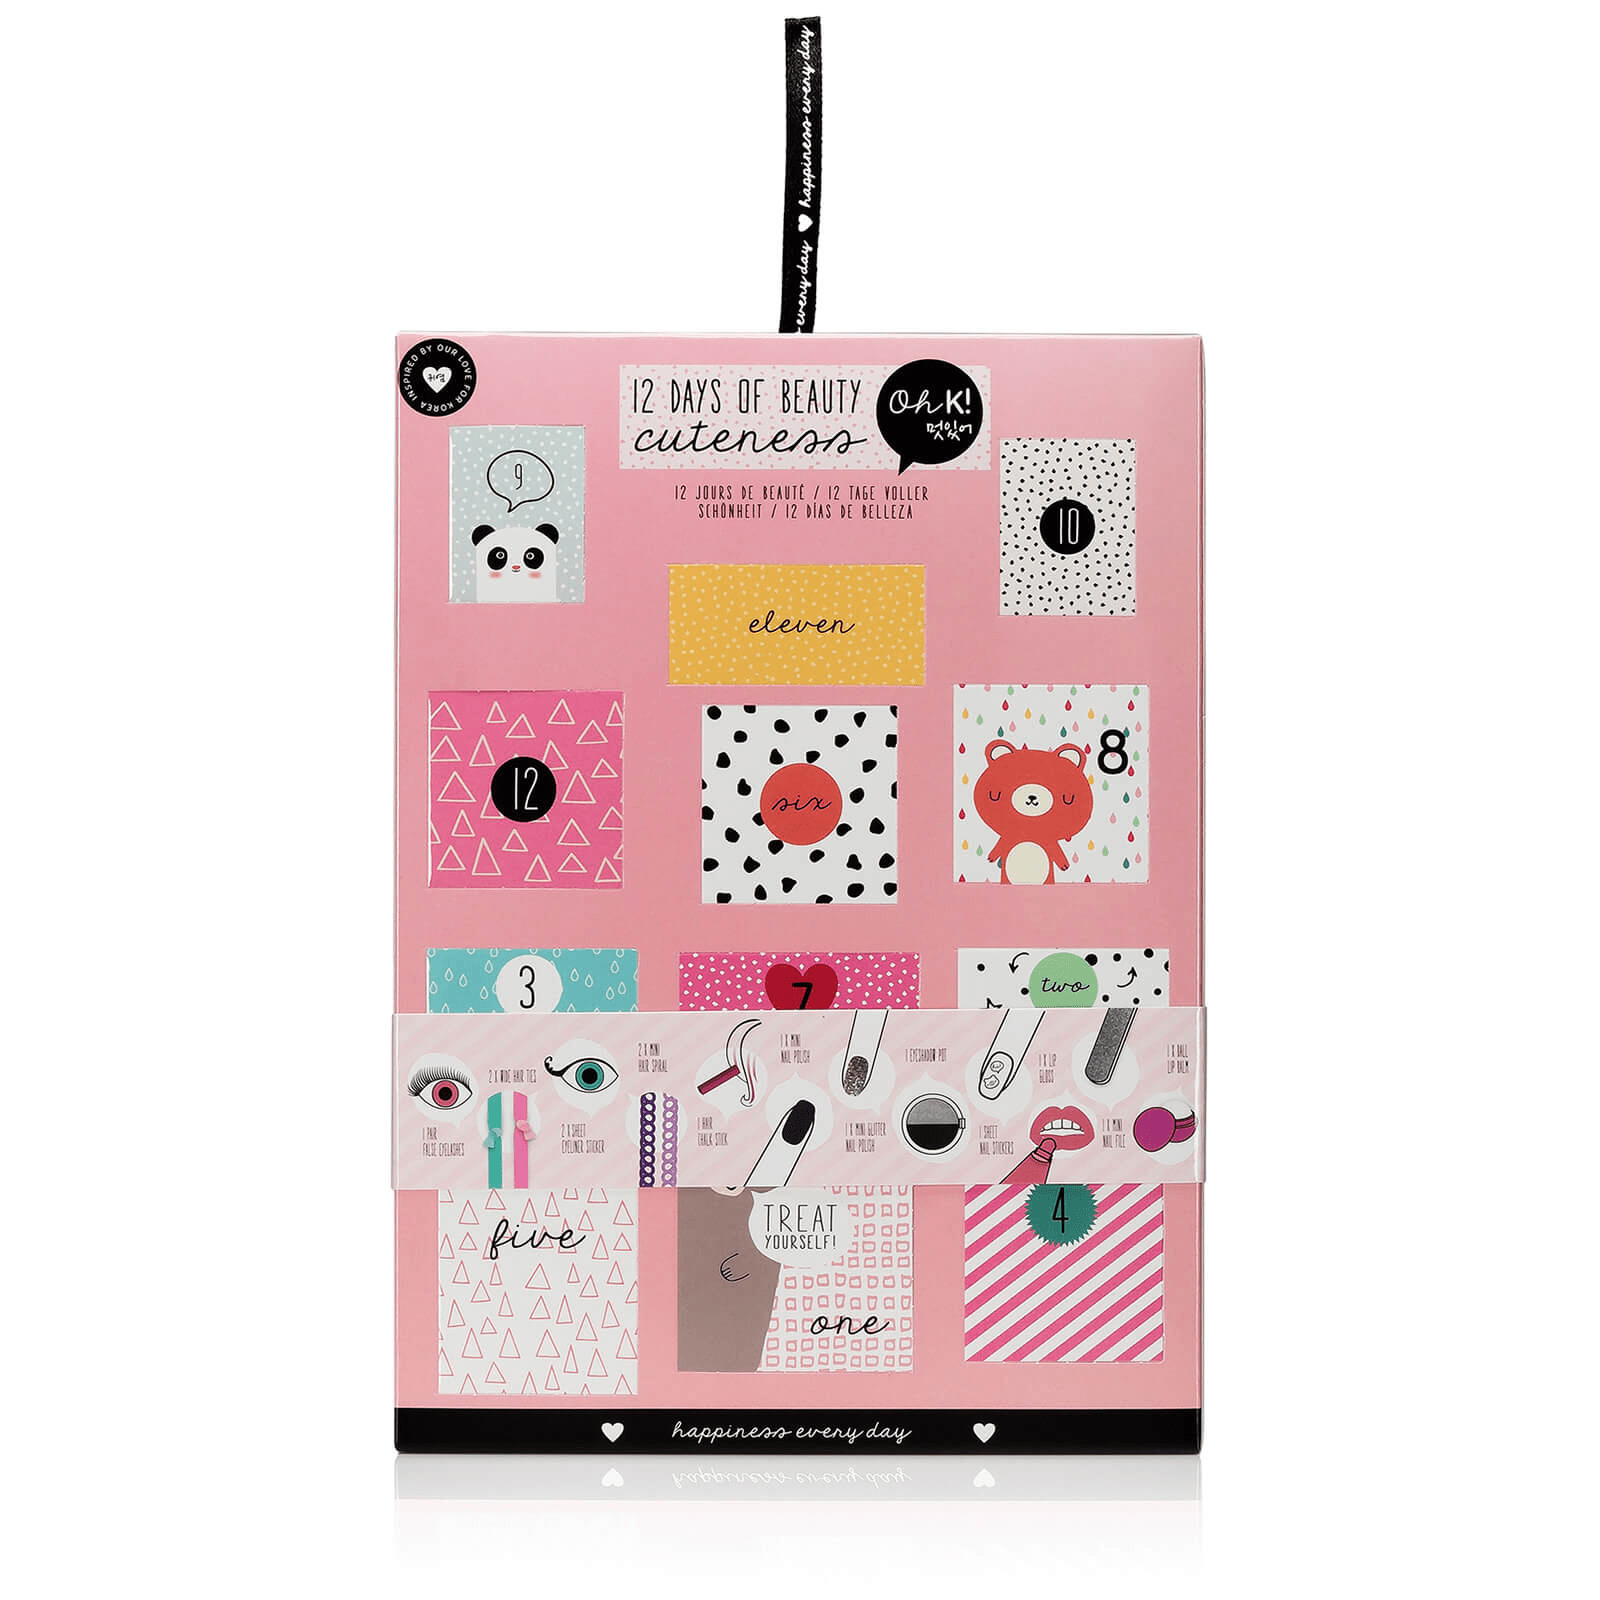 NPW OH K! Beauty Advent Calendar 2018 Available Now + Spoilers! Hello